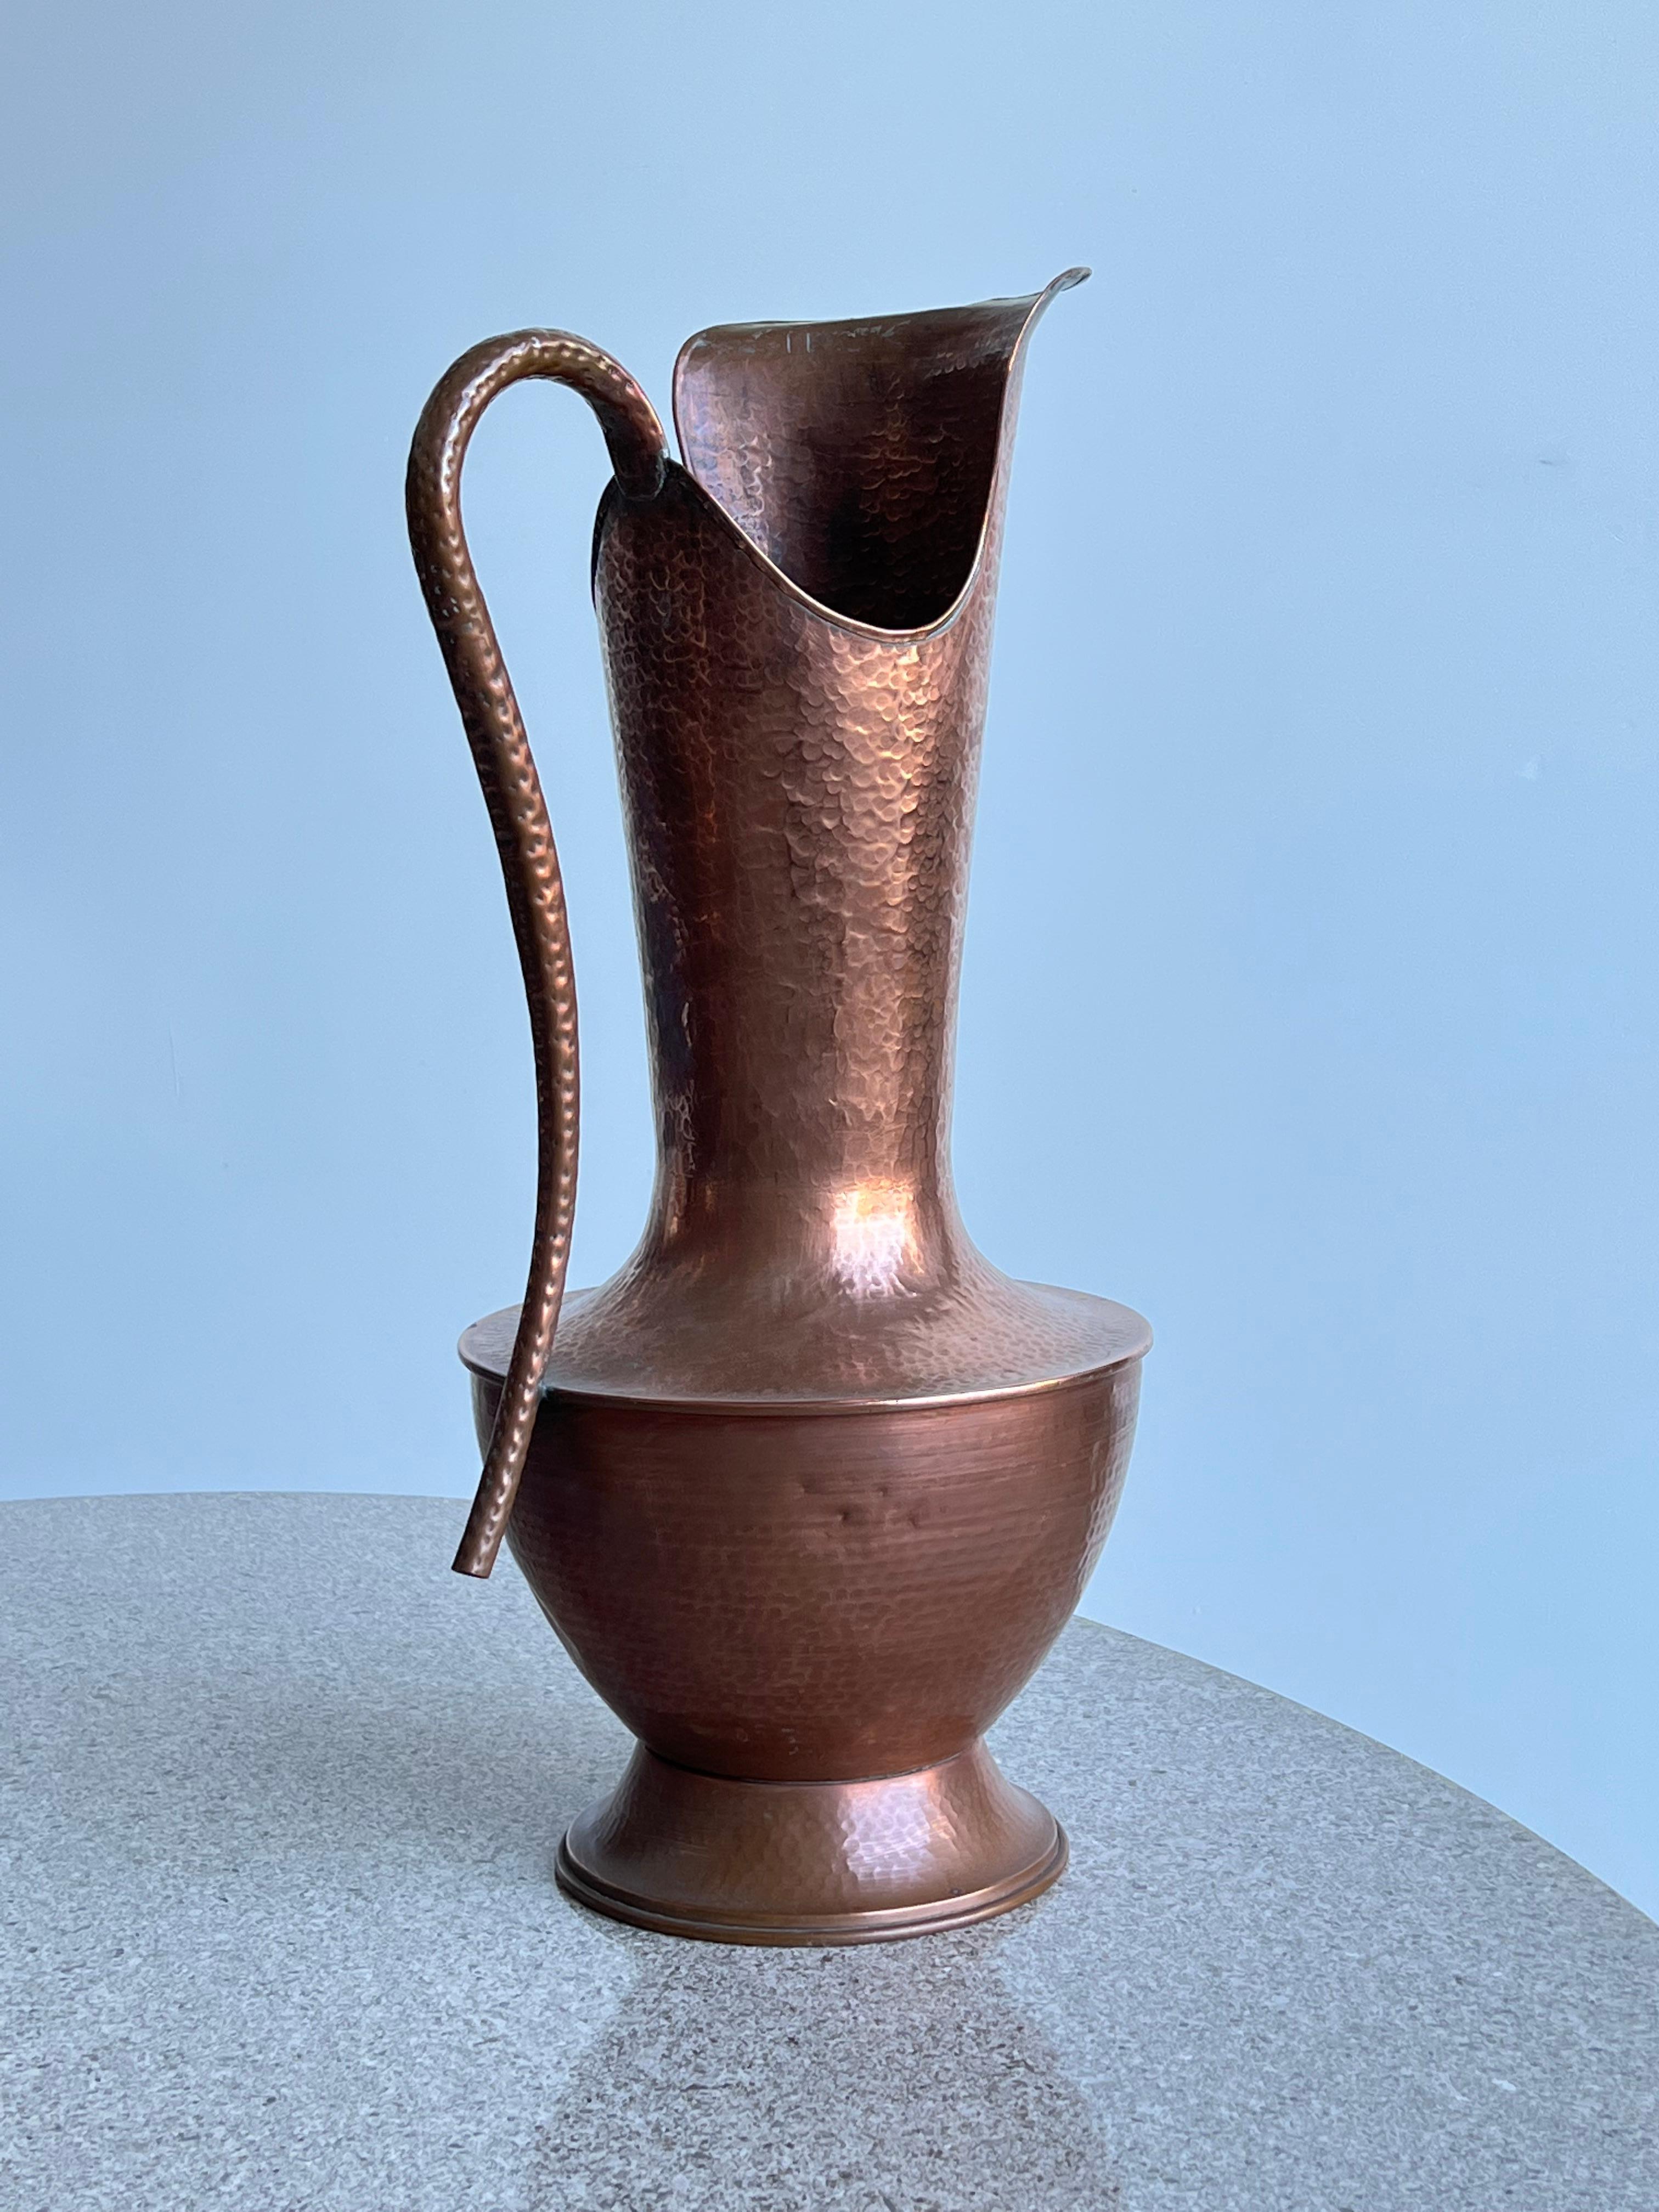 Beautiful large hand beaten copper modernist look vase with a side handle.